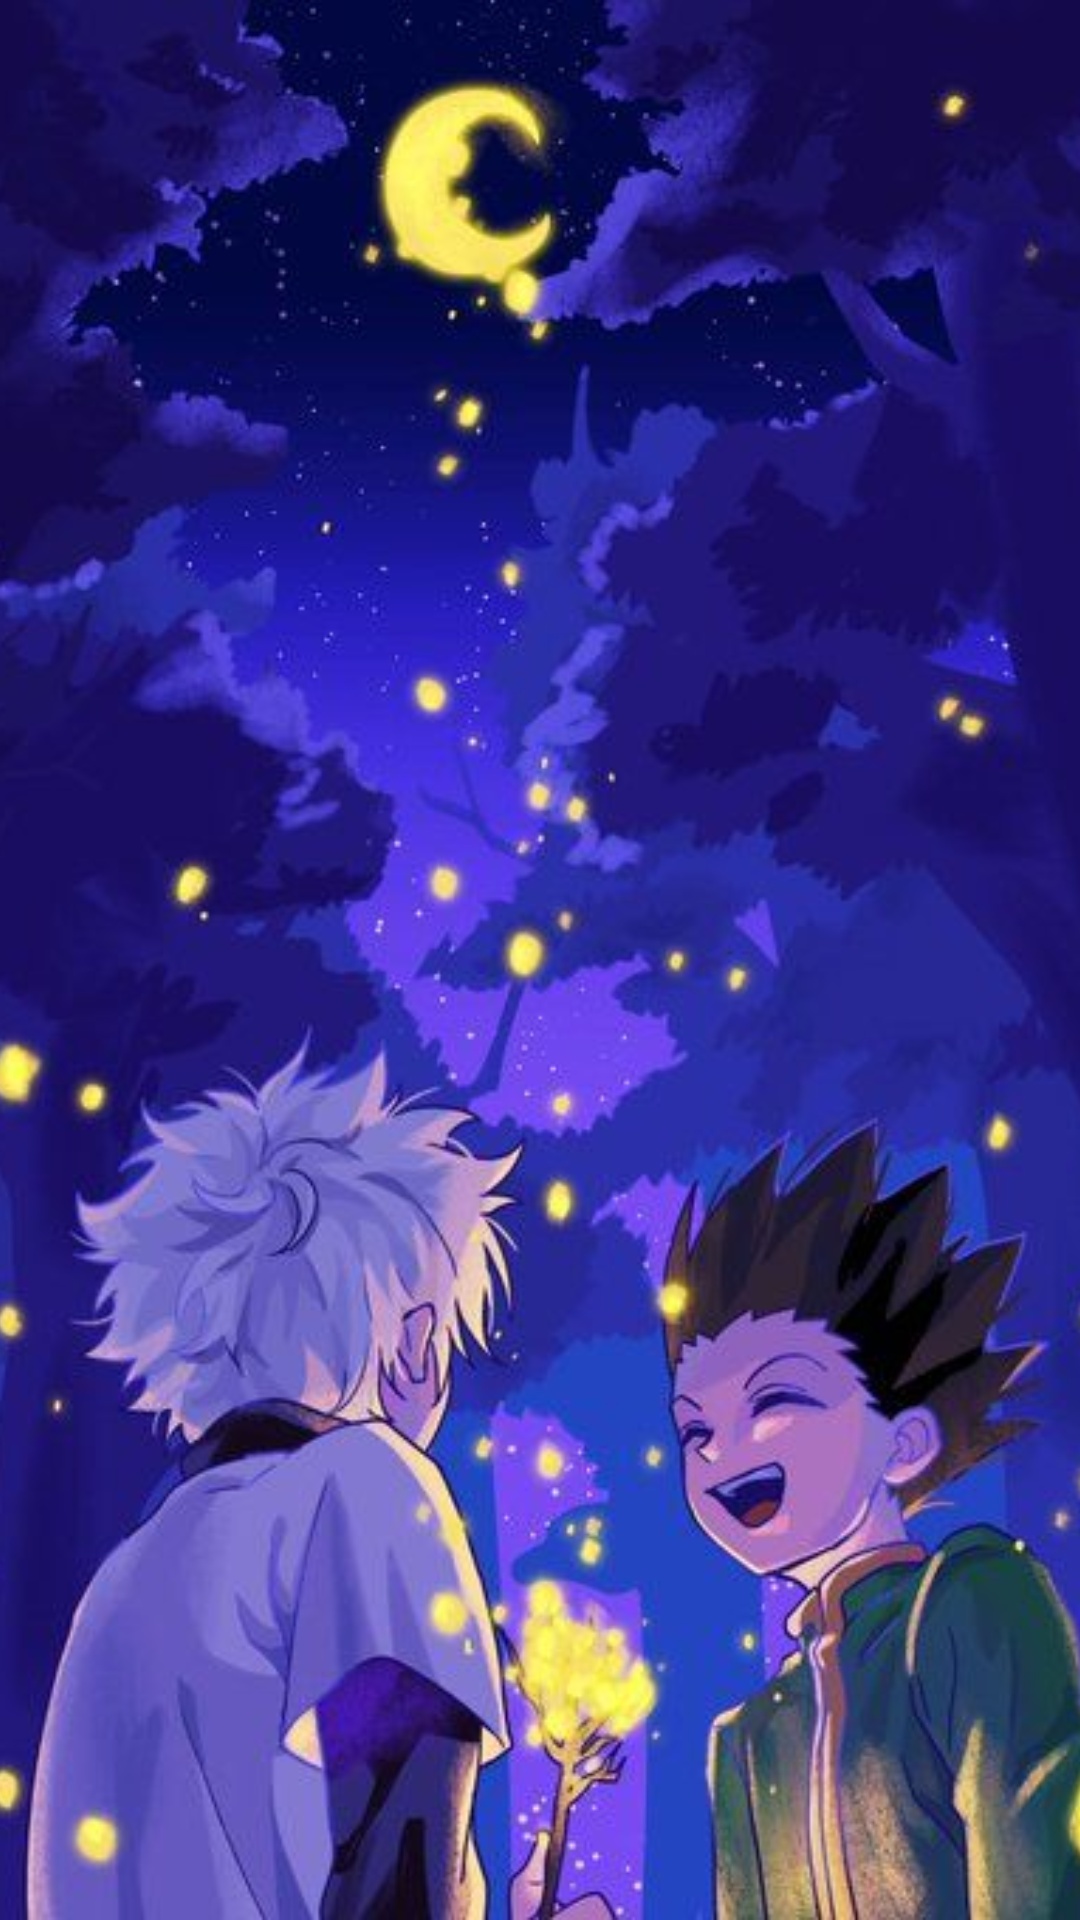 Killua And Gon Wallpapers - Top 25 Best Killua And Gon Wallpapers Download